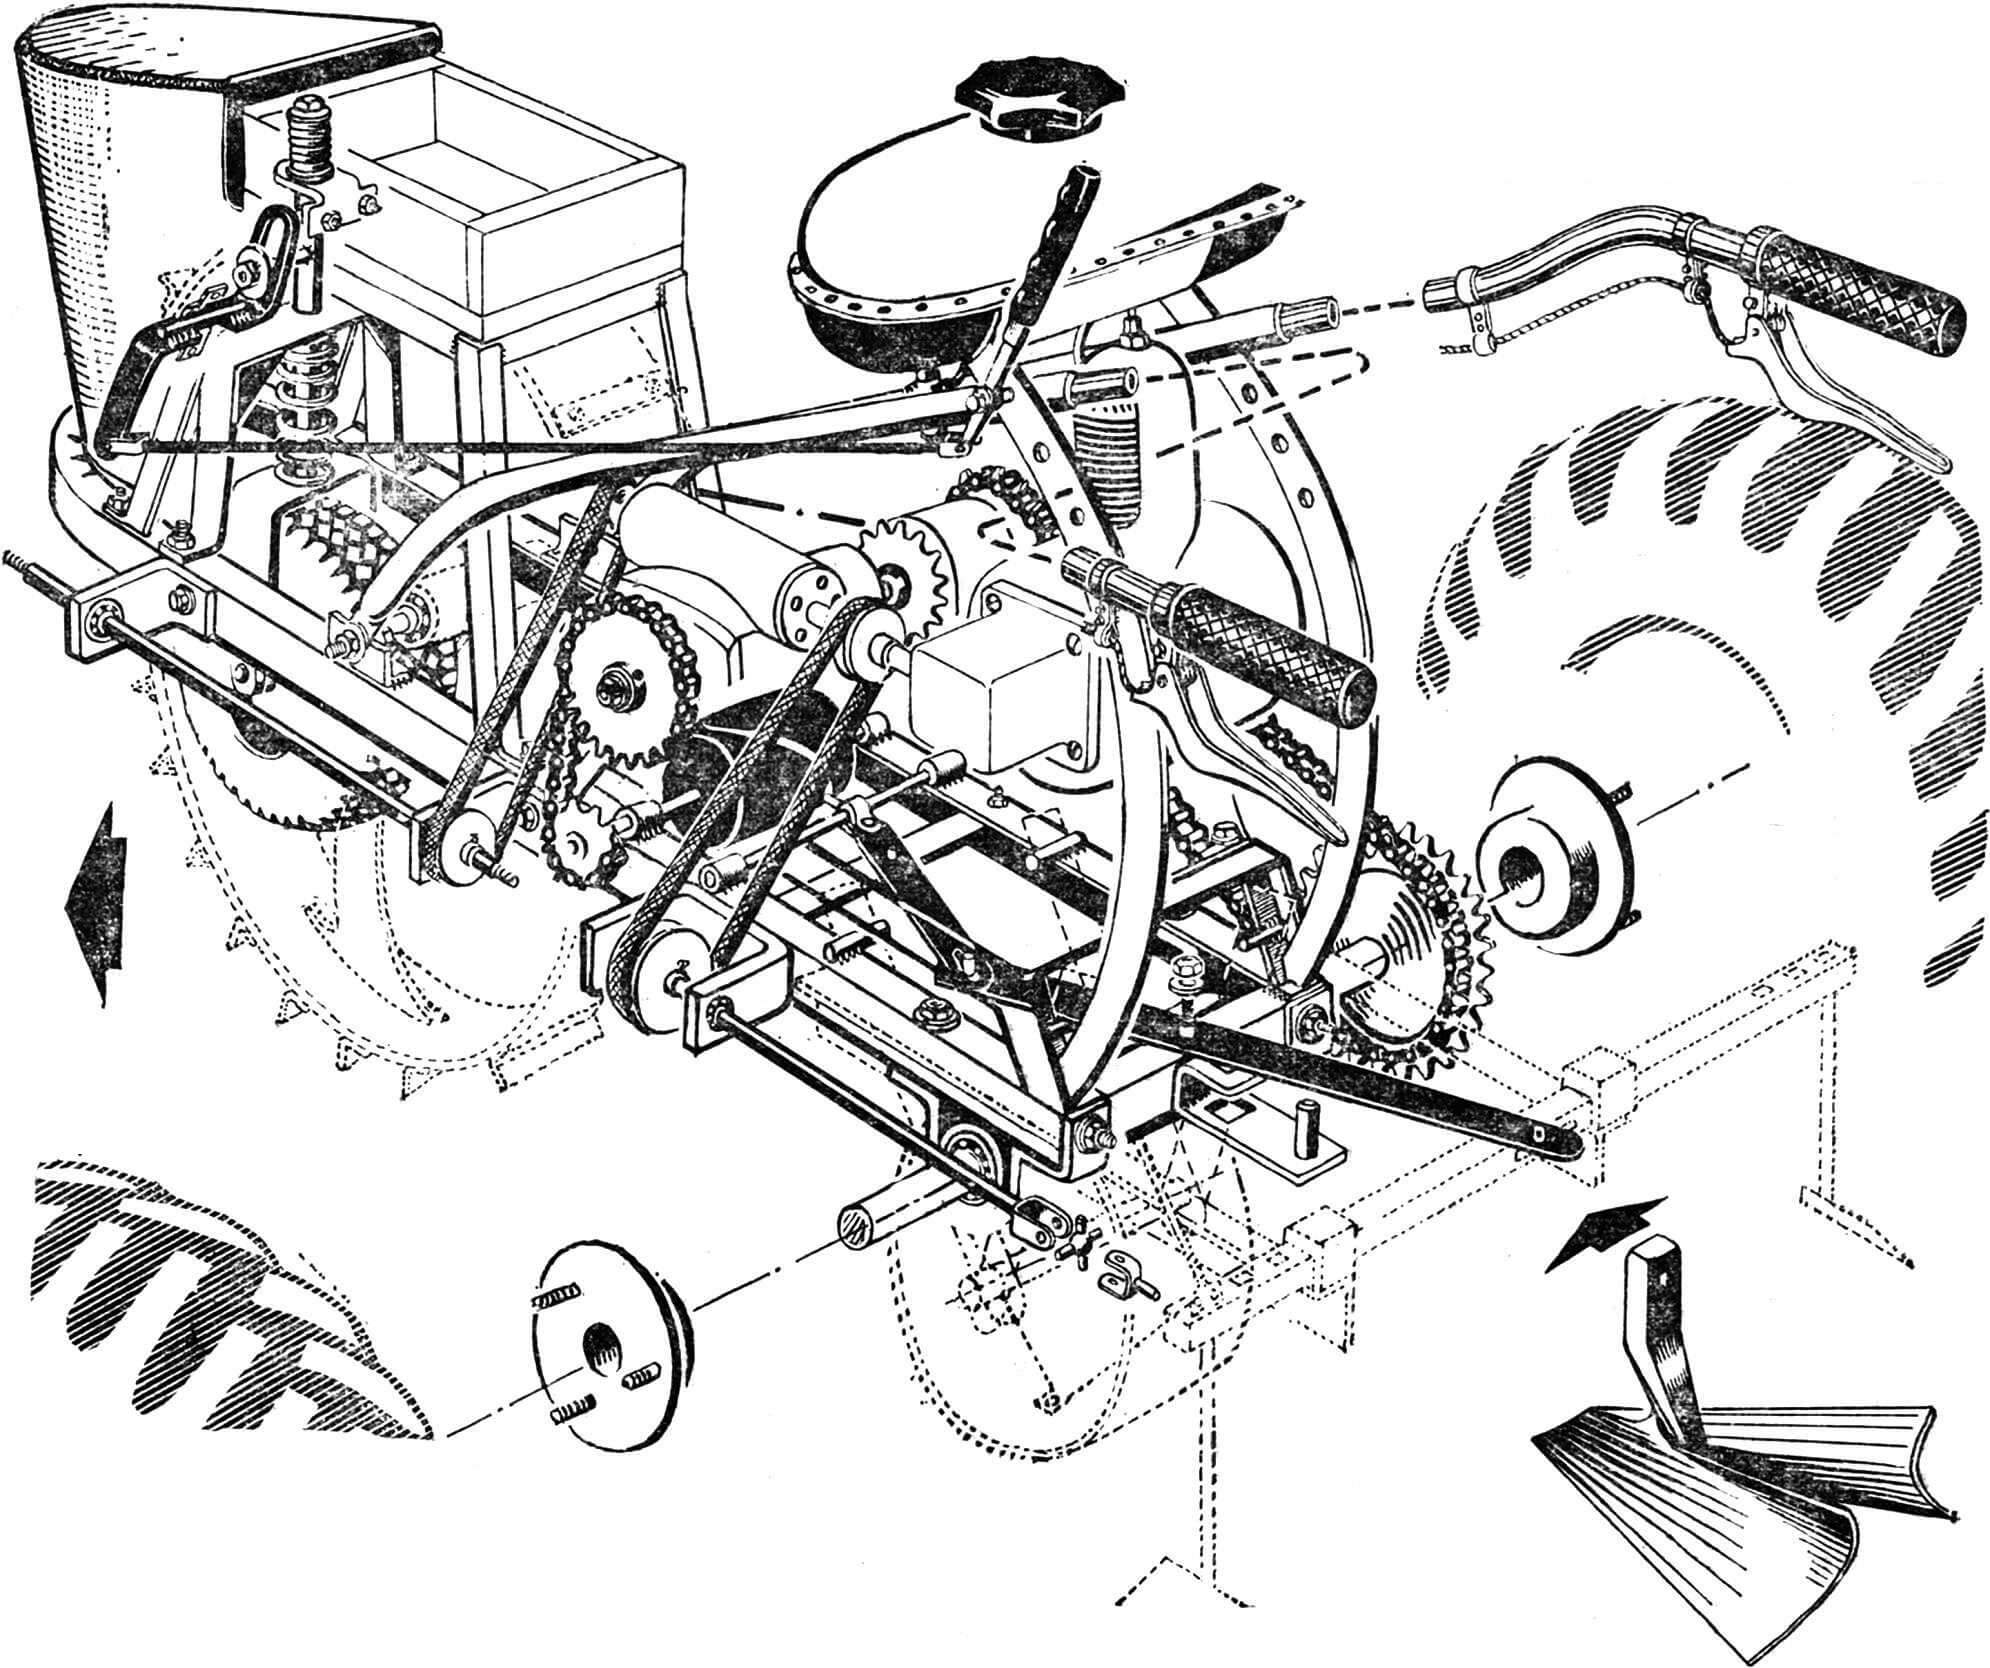 Fig. 5. Arrangement of main units on the universal agricultural machine USMM-2 assembled with a vibrational cultivator (dotted lines show the components of 'CINDERELLA' in the one-wheeled version).